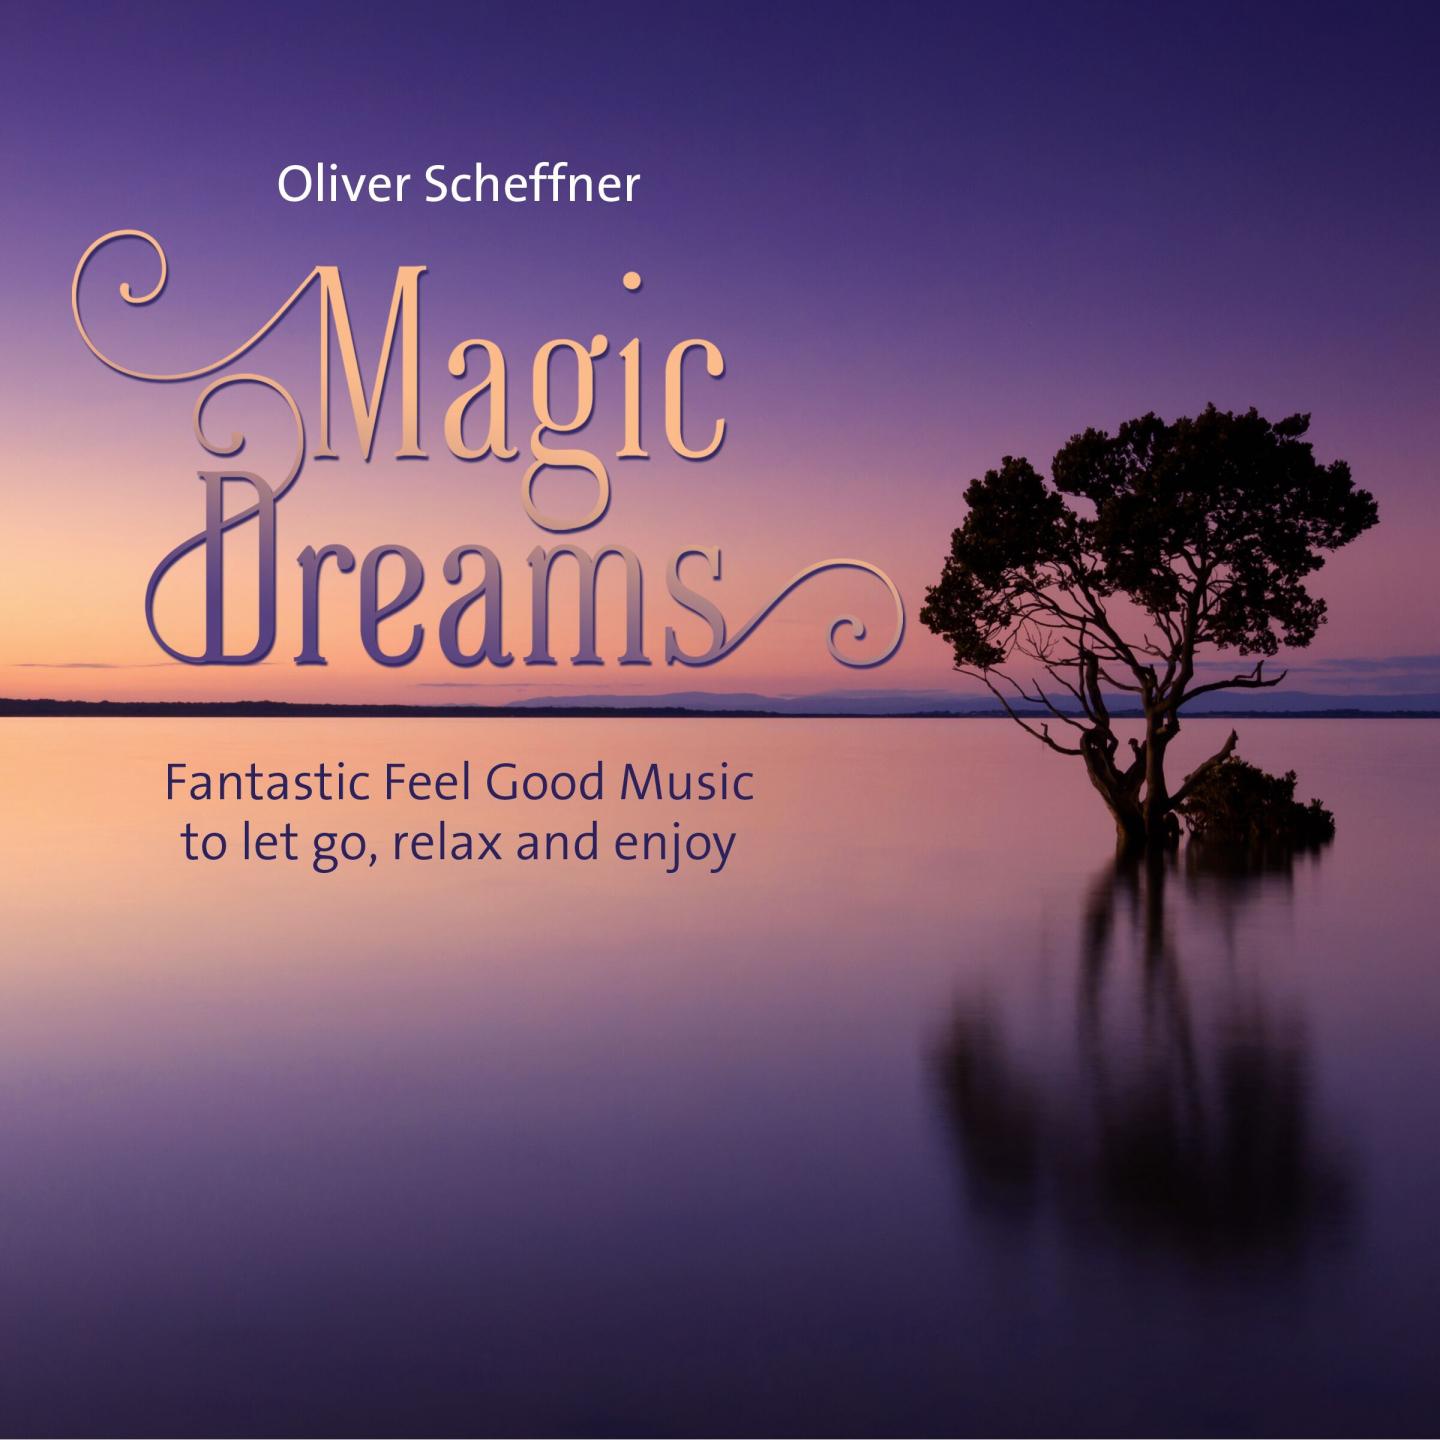 Magic Dreams (Fantastic Feel Good Music to let go, relax and enjoy)